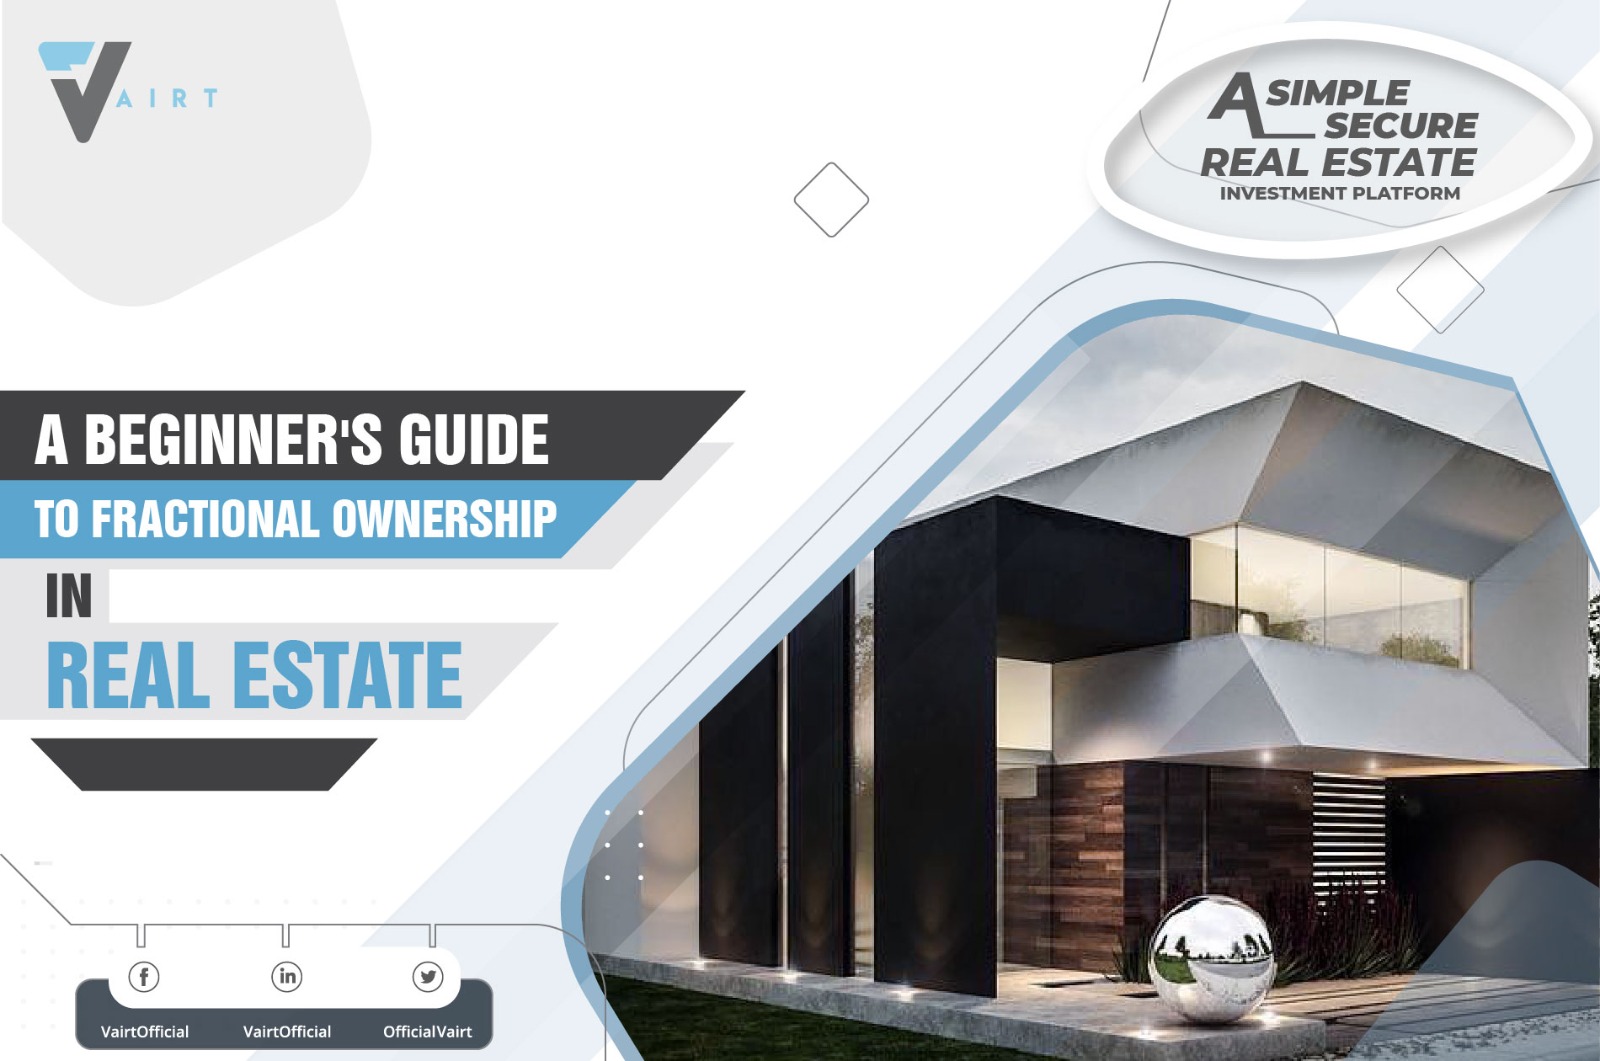 A Beginner's Guide to fractional ownership in Real Estate